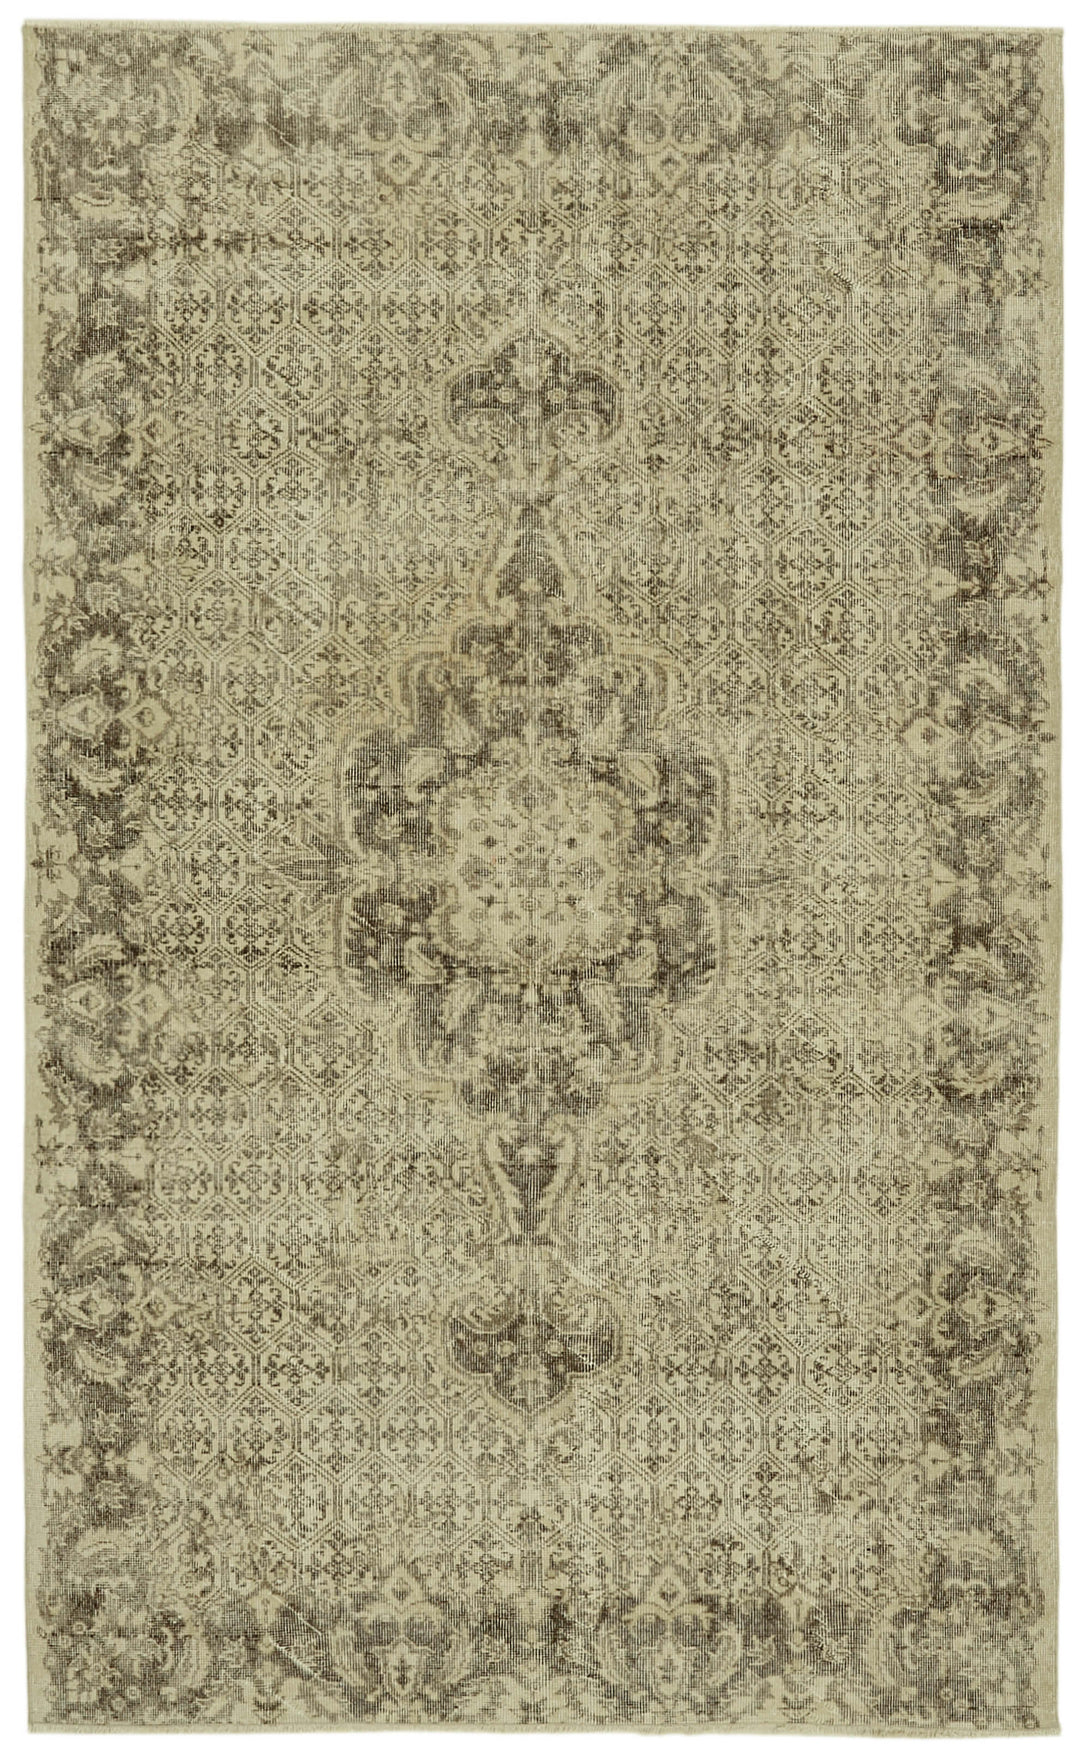 Handmade White Wash Area Rug > Design# OL-AC-41776 > Size: 5'-8" x 9'-2", Carpet Culture Rugs, Handmade Rugs, NYC Rugs, New Rugs, Shop Rugs, Rug Store, Outlet Rugs, SoHo Rugs, Rugs in USA